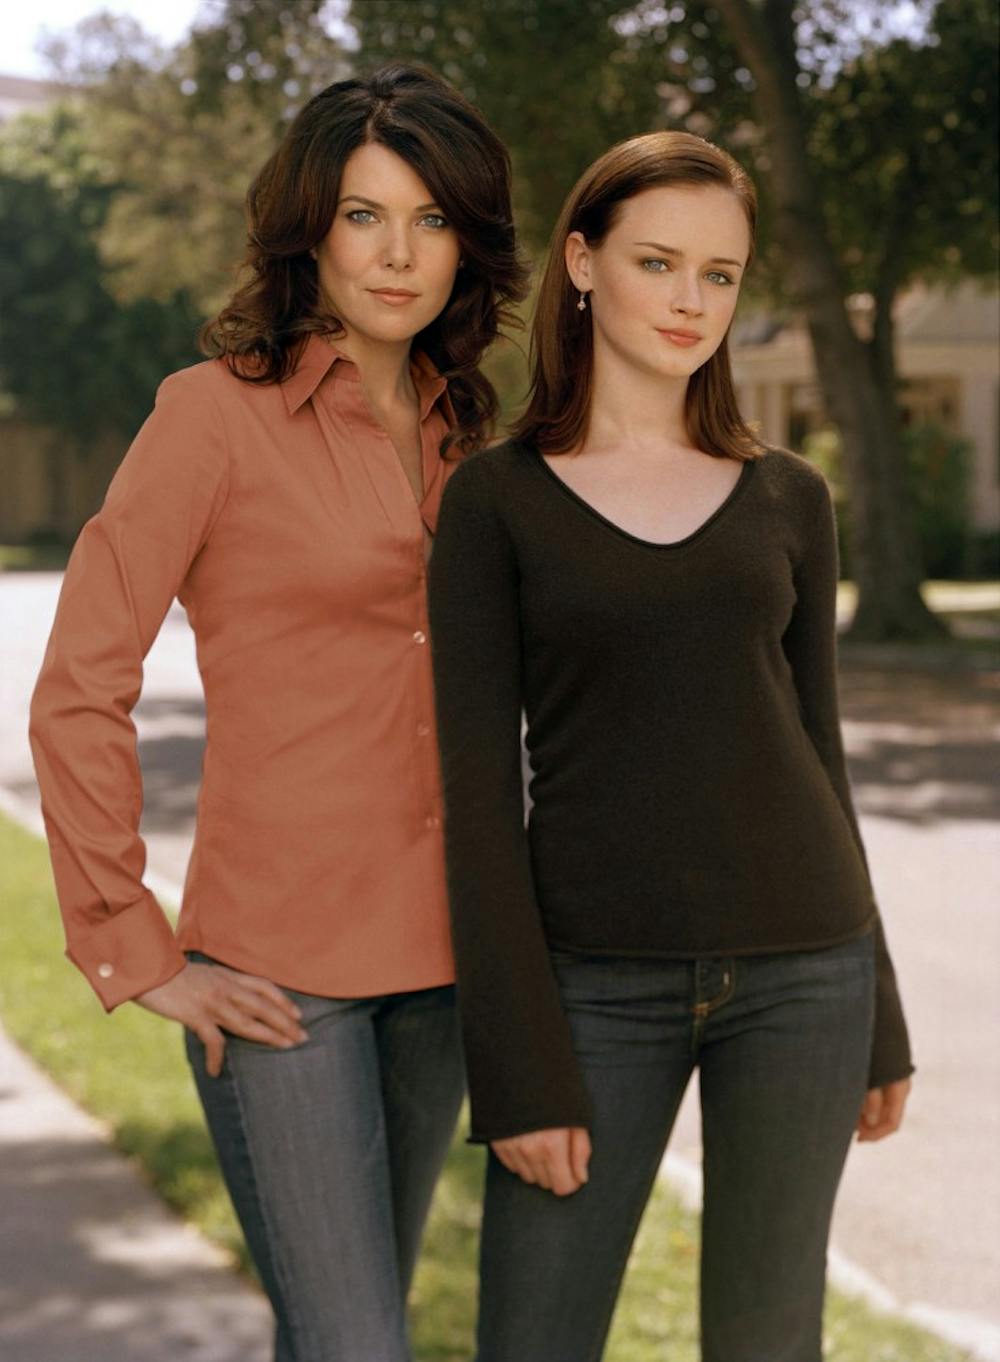 KRT PLUGGED IN STORY SLUGGED: TVONDVD KRT PHOTO (December 14) "Gilmore Girls: The Complete Fifth Season" (Warner, 22 episodes, six discs, $59.98) collects the 2004-05 season, which ended with Rory in trouble and Lorelai proposing to Luke.  (gsb) 2005